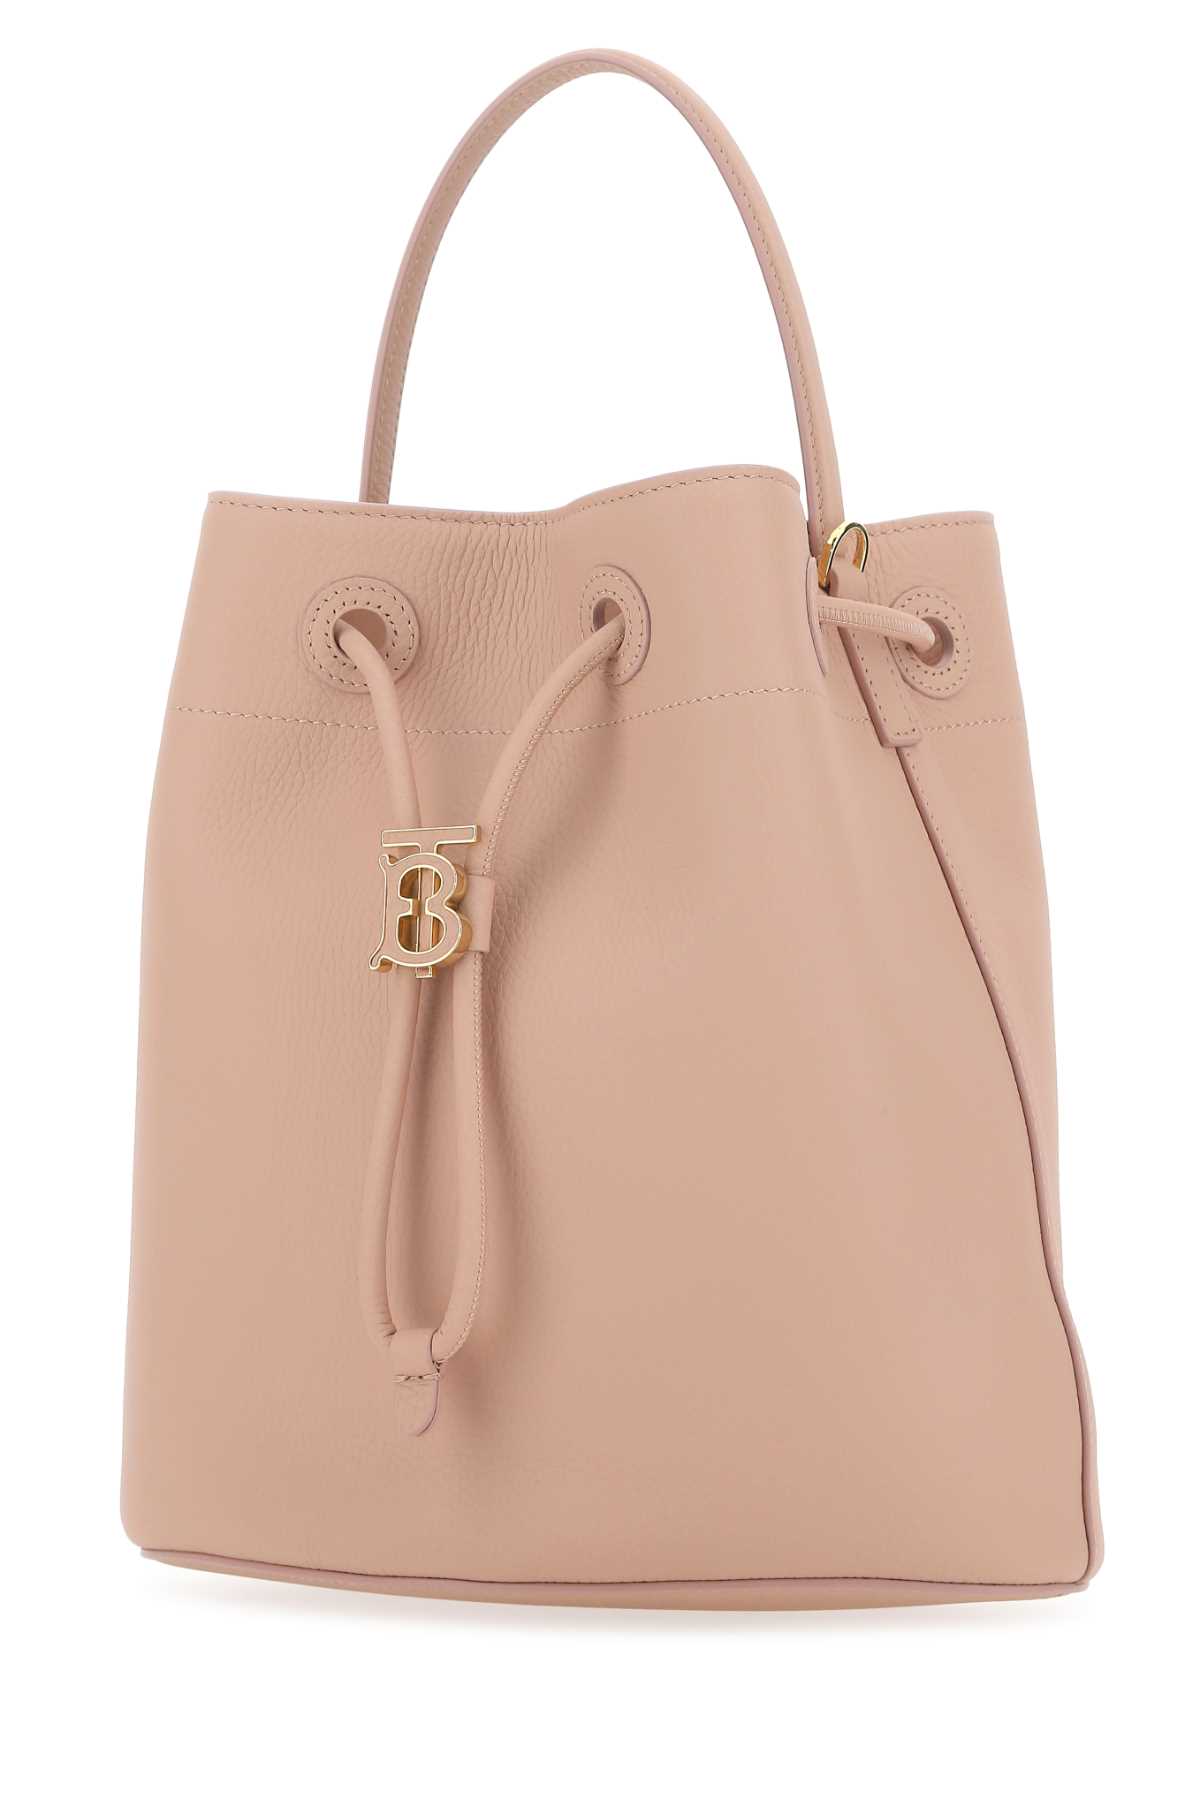 Burberry Pink Leather Small Tb Bucket Bag In A3661